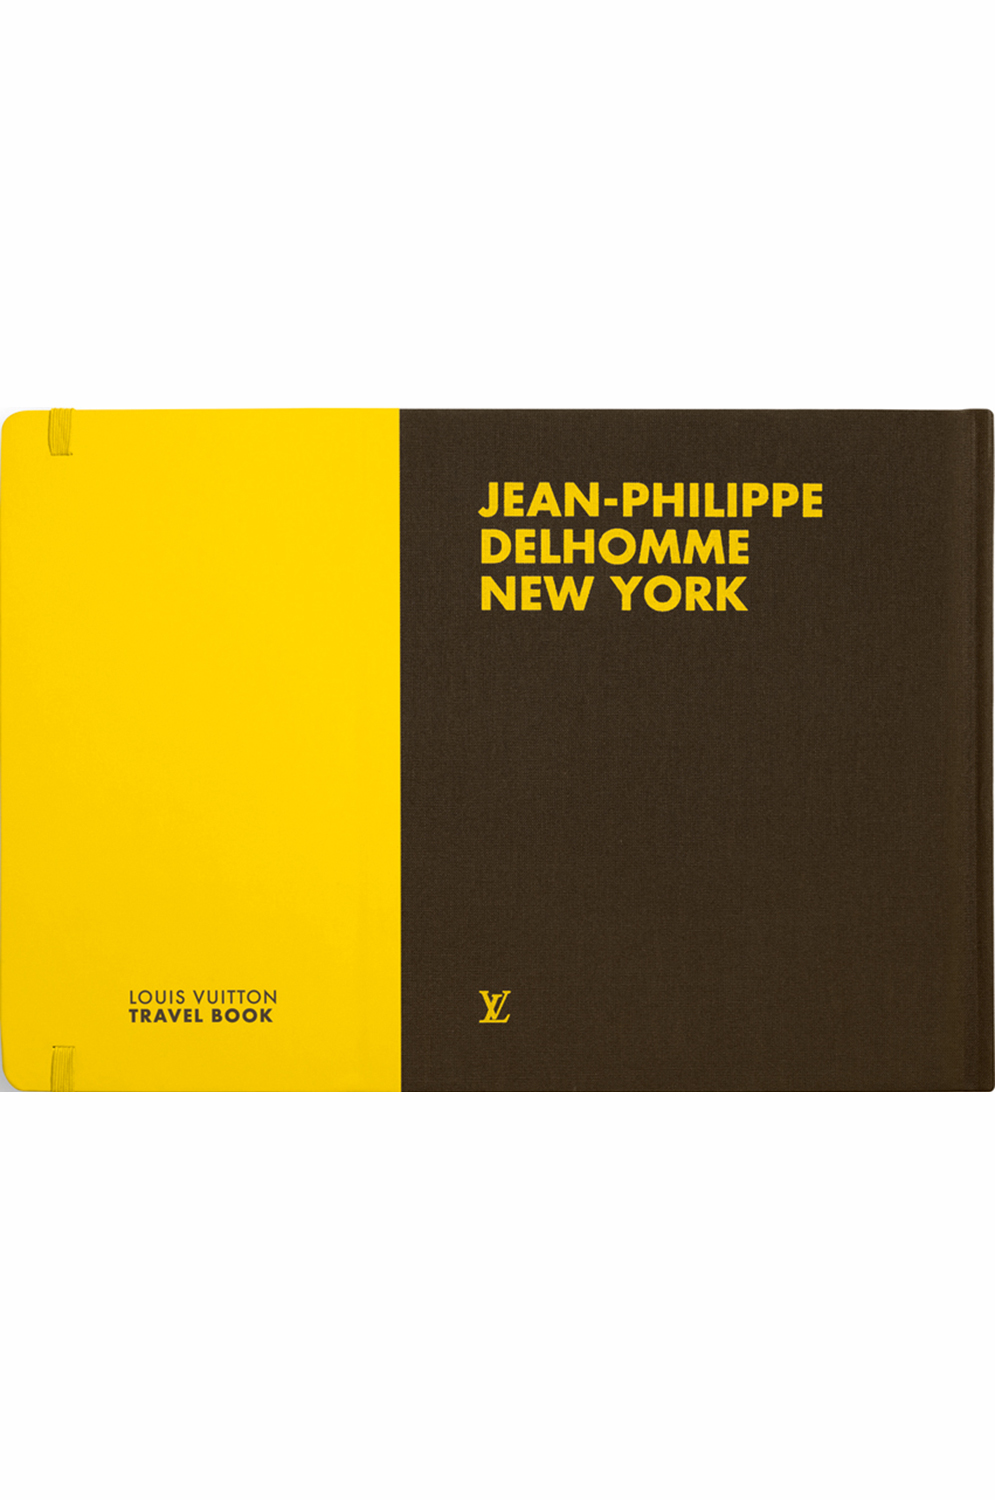  New York Travel Book  Published by Louis Vuitton  Buy from &nbsp;Louis Vuitton   ​ 